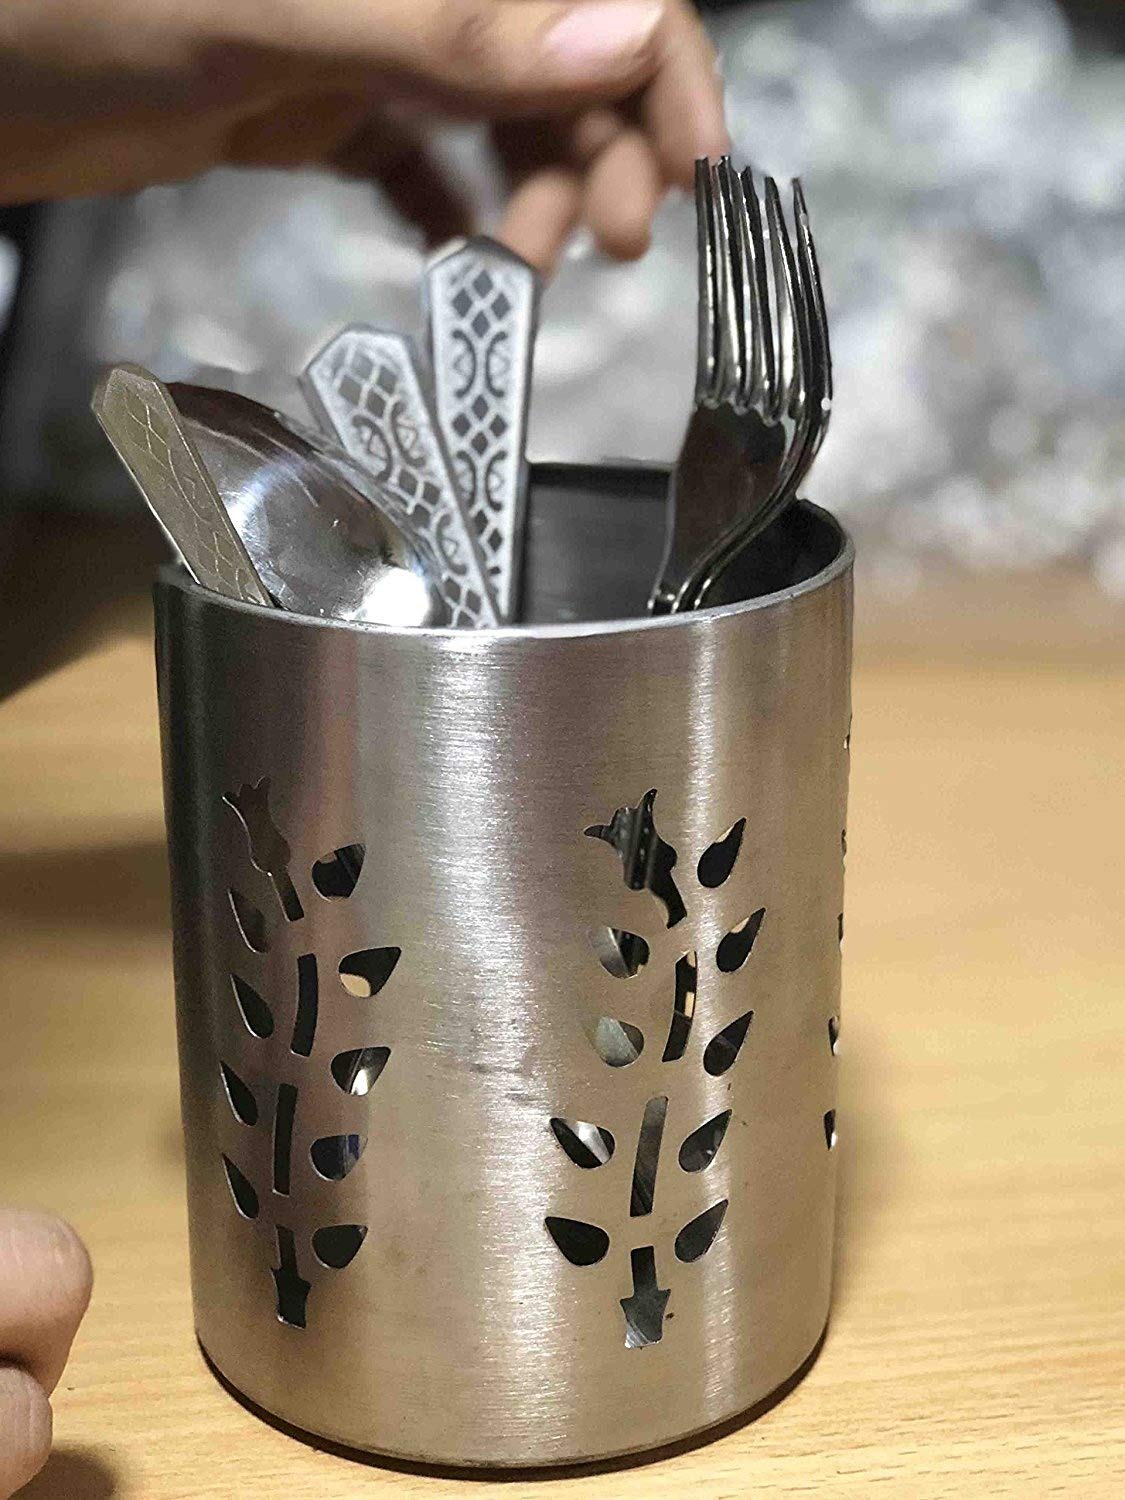 Stainless Steel Utensil Organizer Caddy - Cutlery, Cooking Utensils and Gadgets, Caddy Spoon Holder Silver Color Size 4 X 4 Inch, Easter Day/Mothers Day/Good Friday Gift